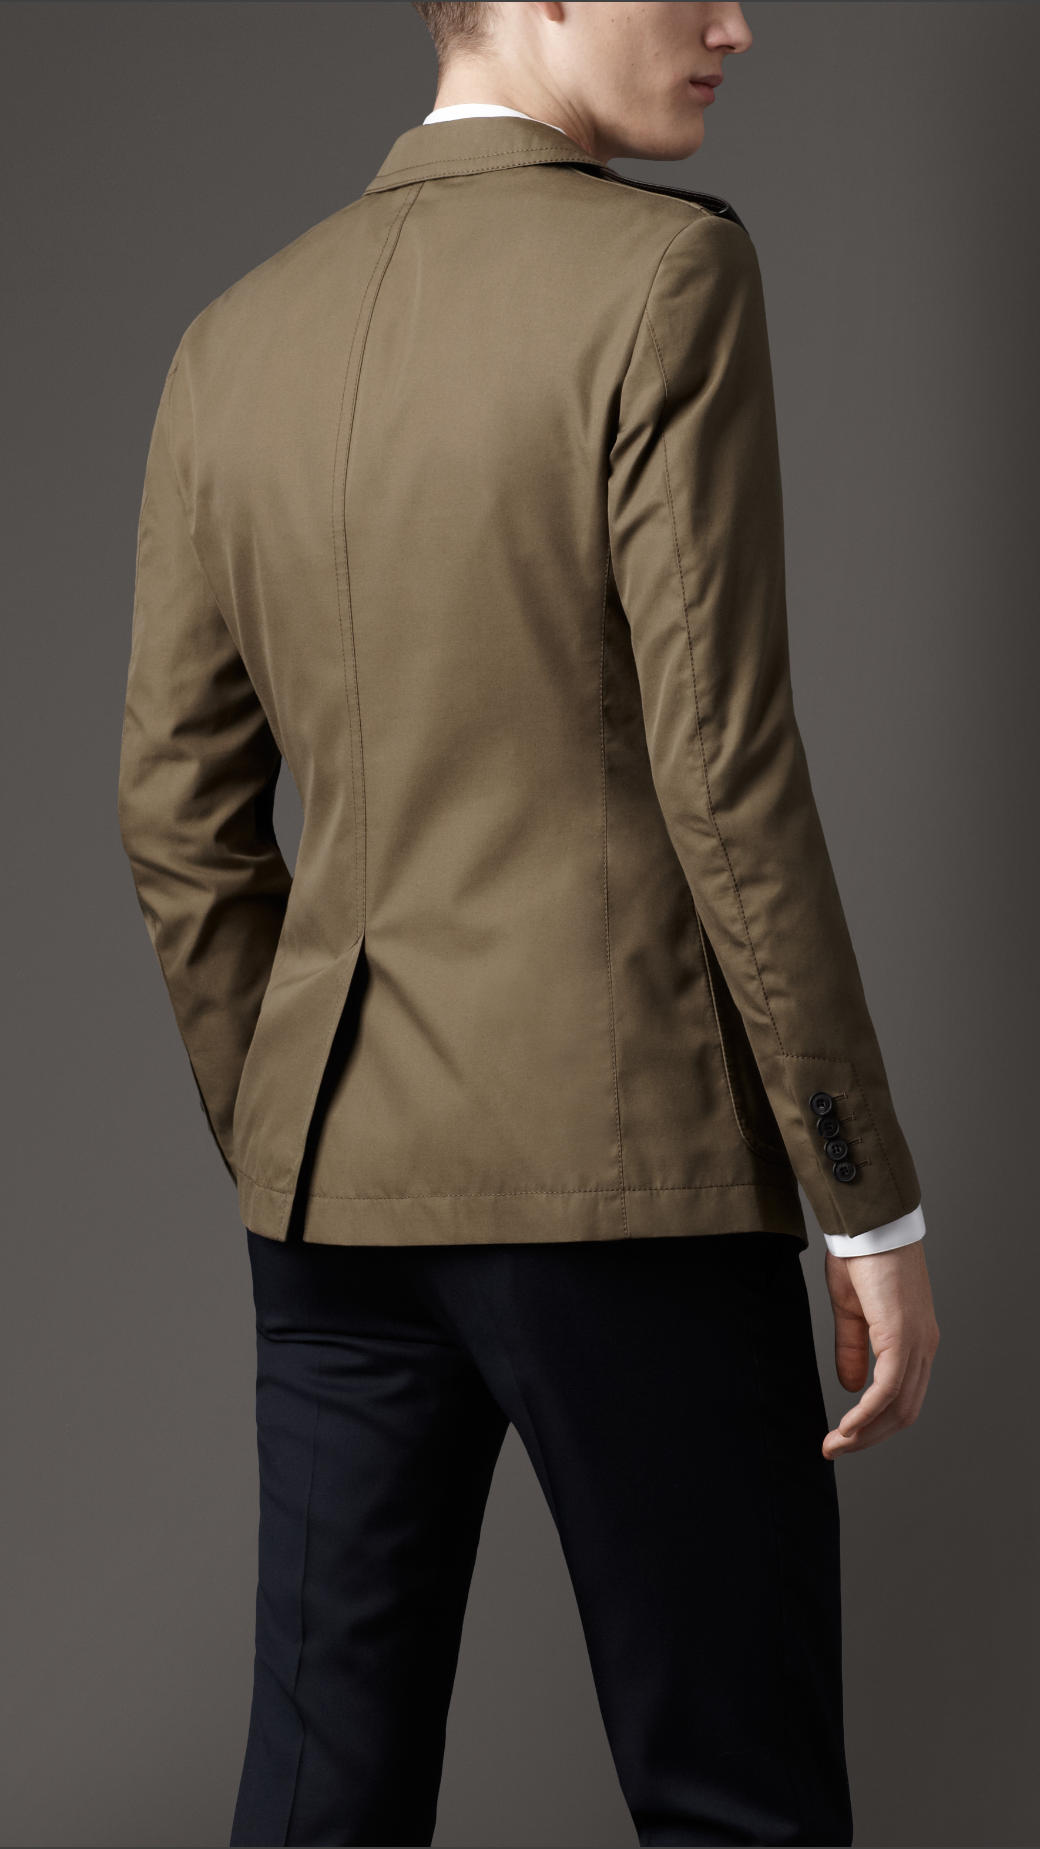 Burberry Modern Fit Cotton Gabardine Sports Jacket with Leather ...